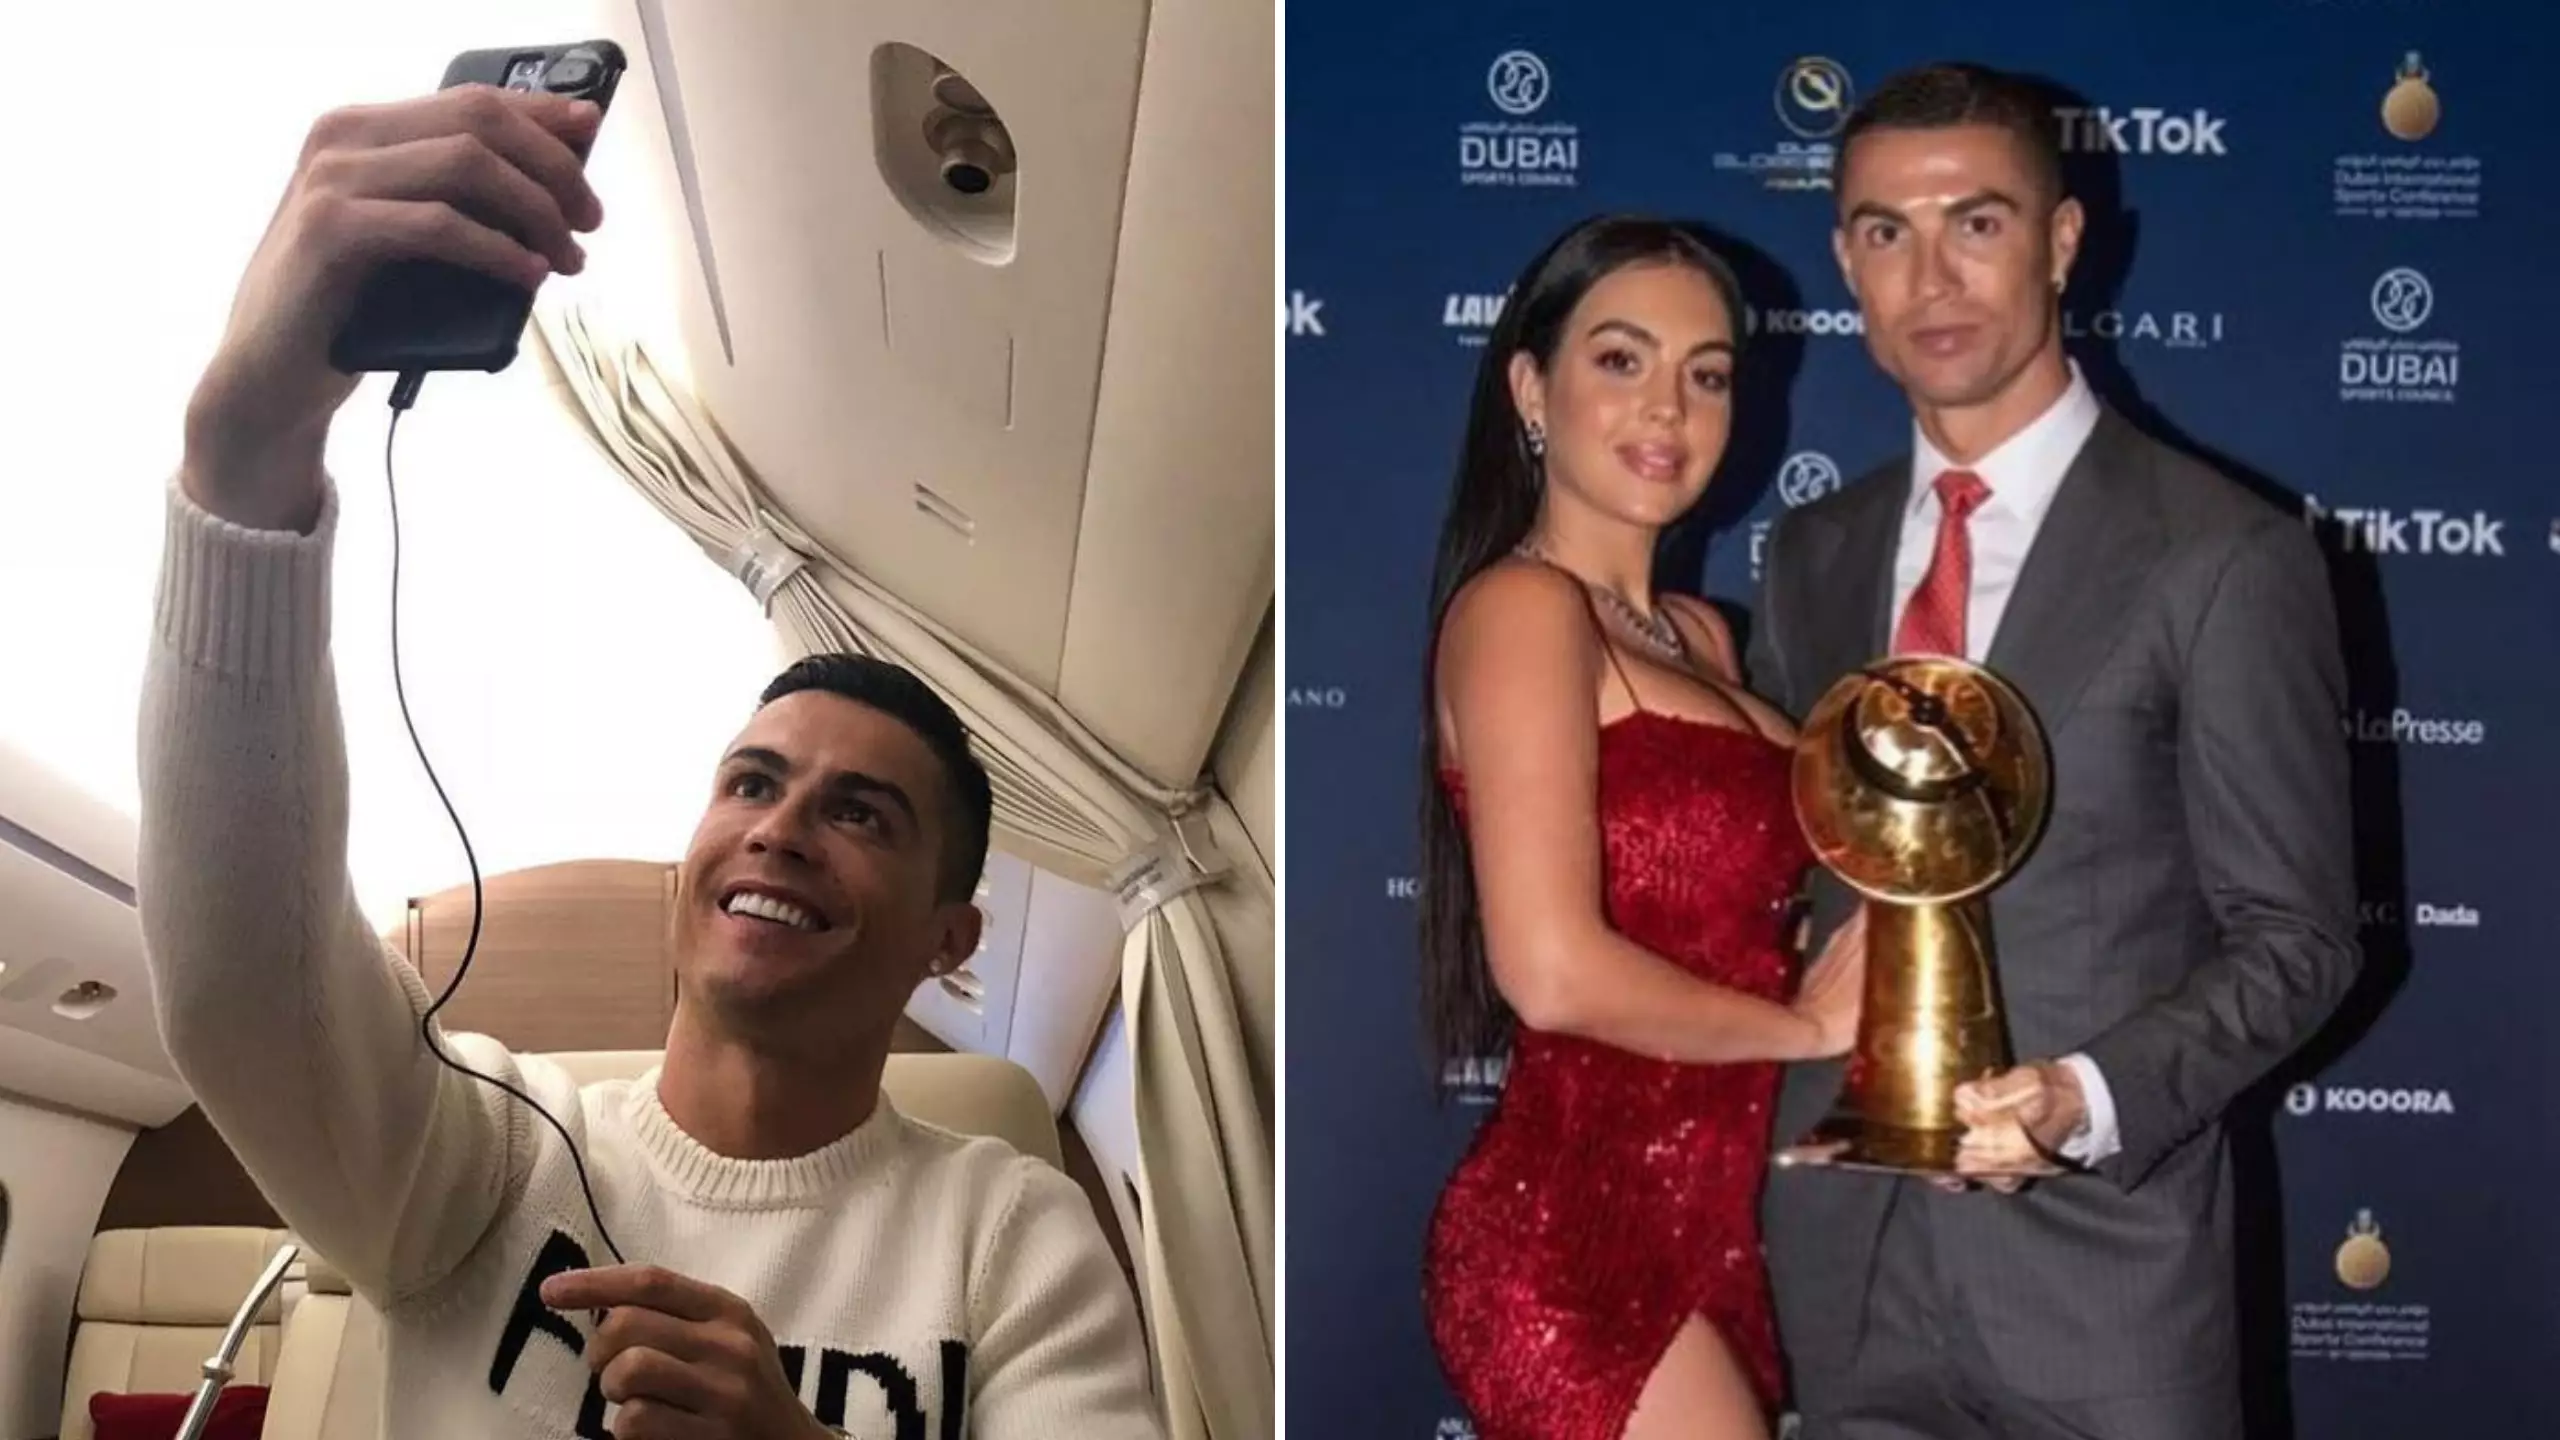 Cristiano Ronaldo Is The First Person To Have 500 Million Followers Across Instagram, Facebook and Twitter